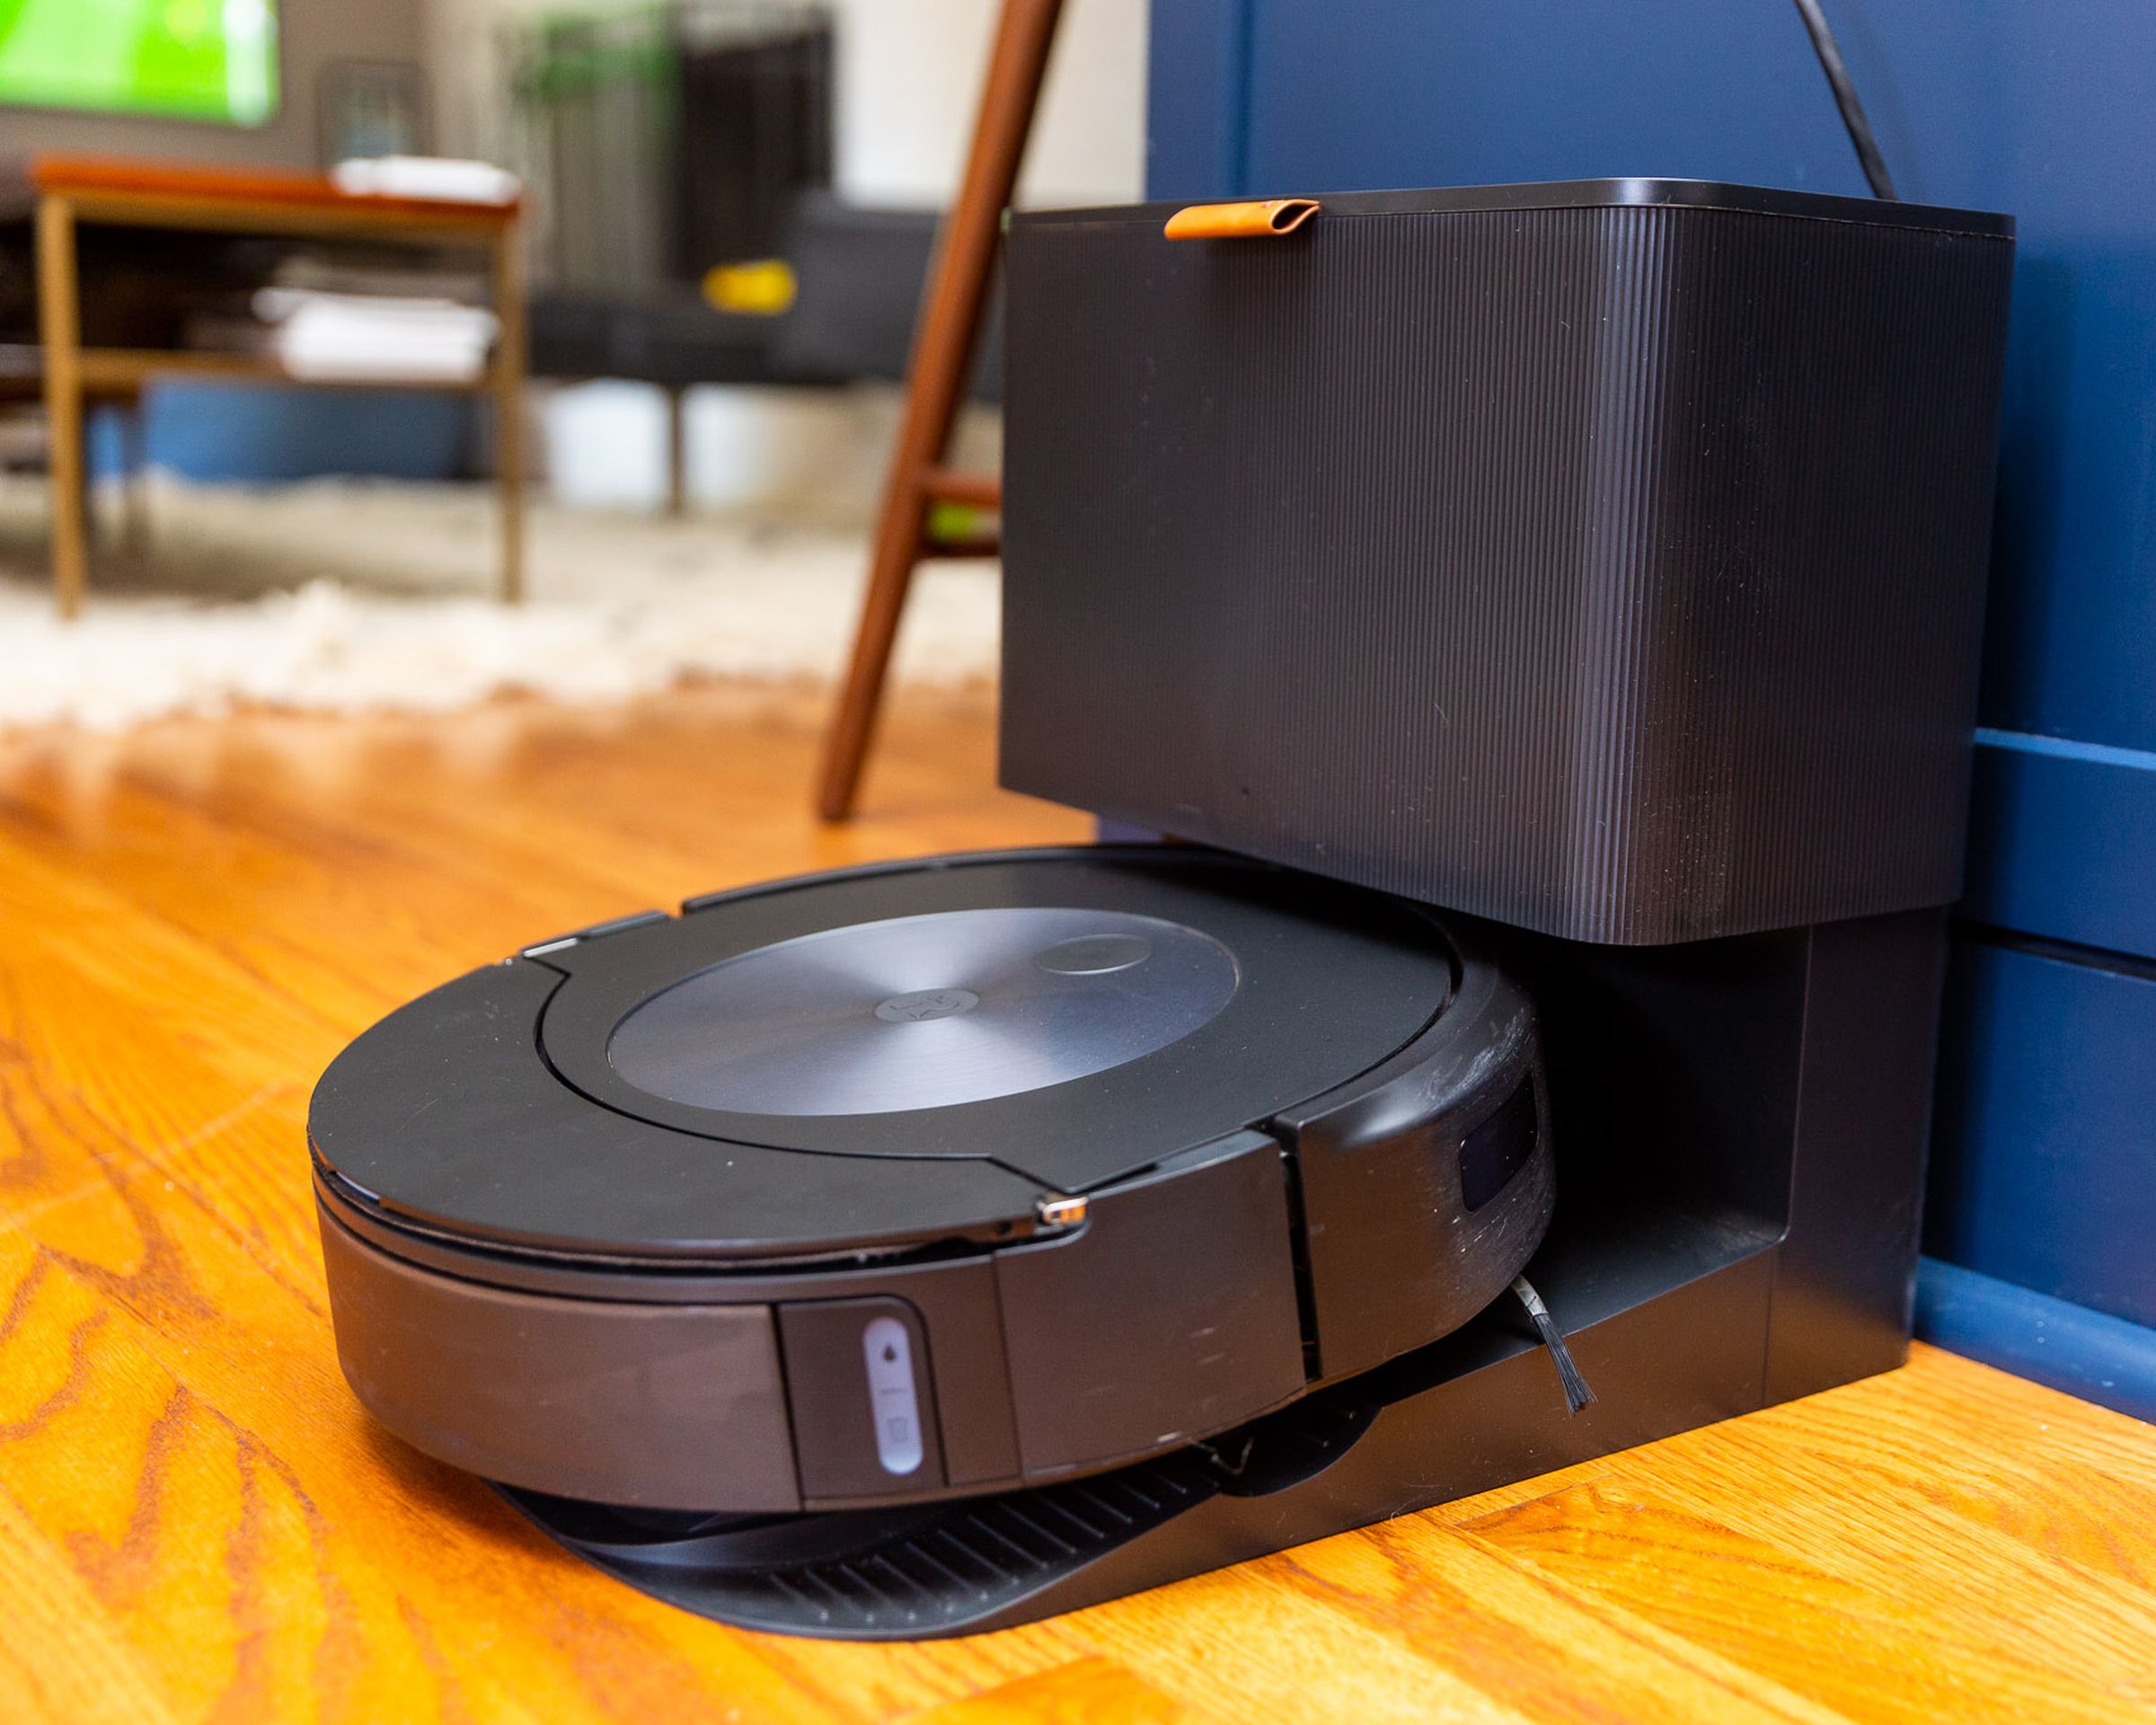 A Roomba vacuum on its docking station in an open plan kitchen living room.